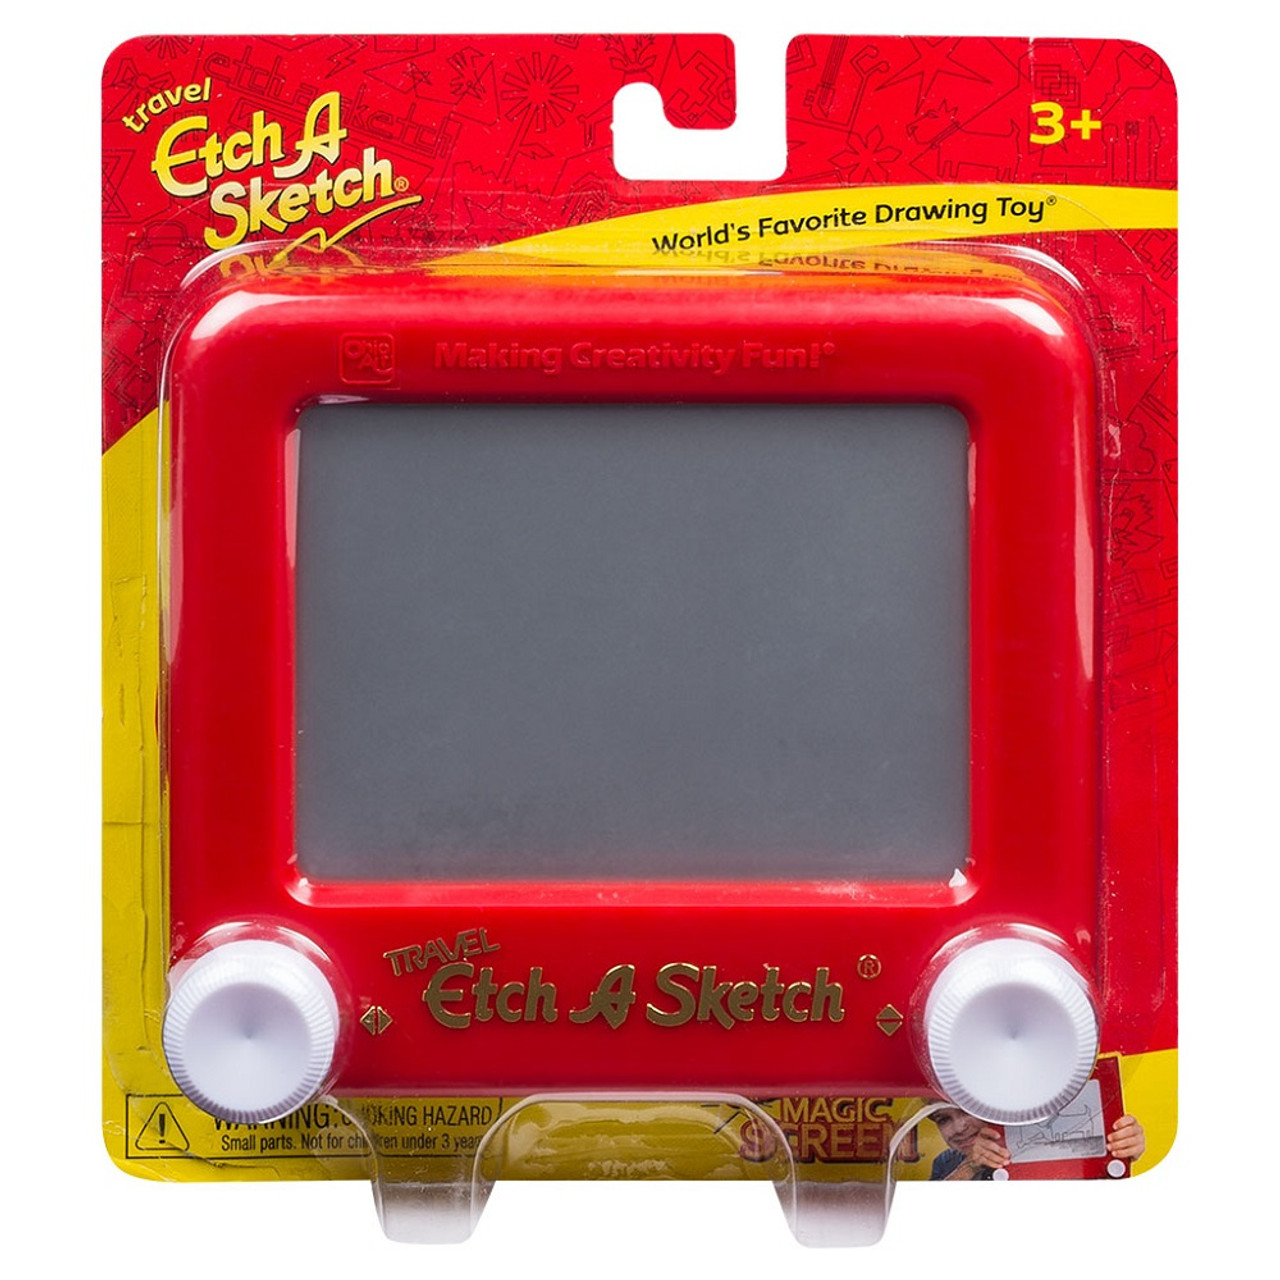 36 Awesome Etch a sketch box drawing is fun 1980 for New Design